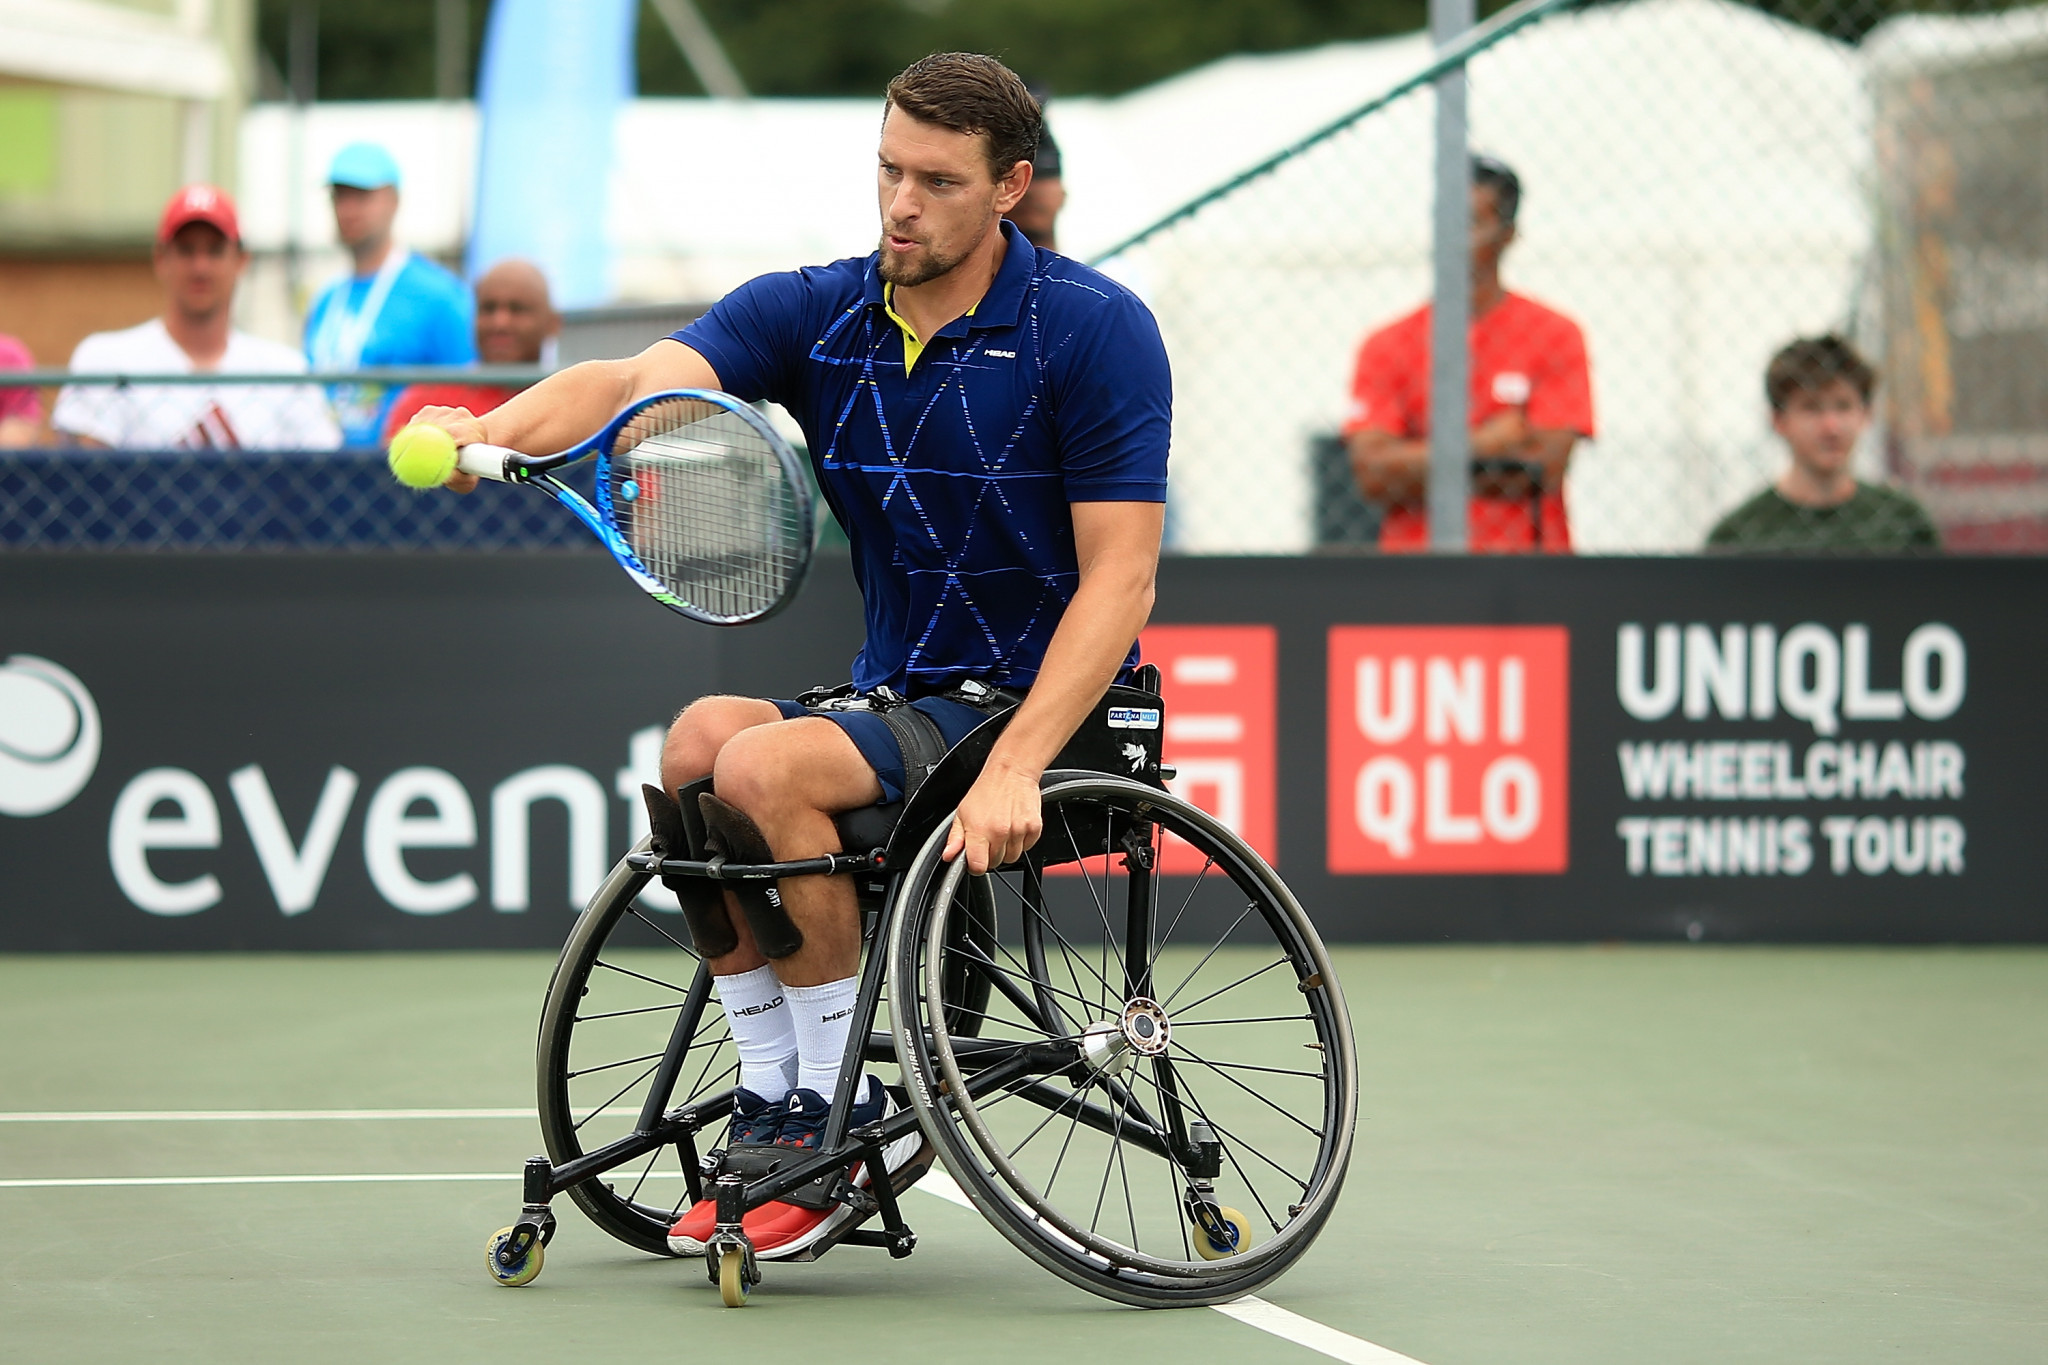 Home title dream still alive for Gerard at Belgian Open Wheelchair Tennis Championships